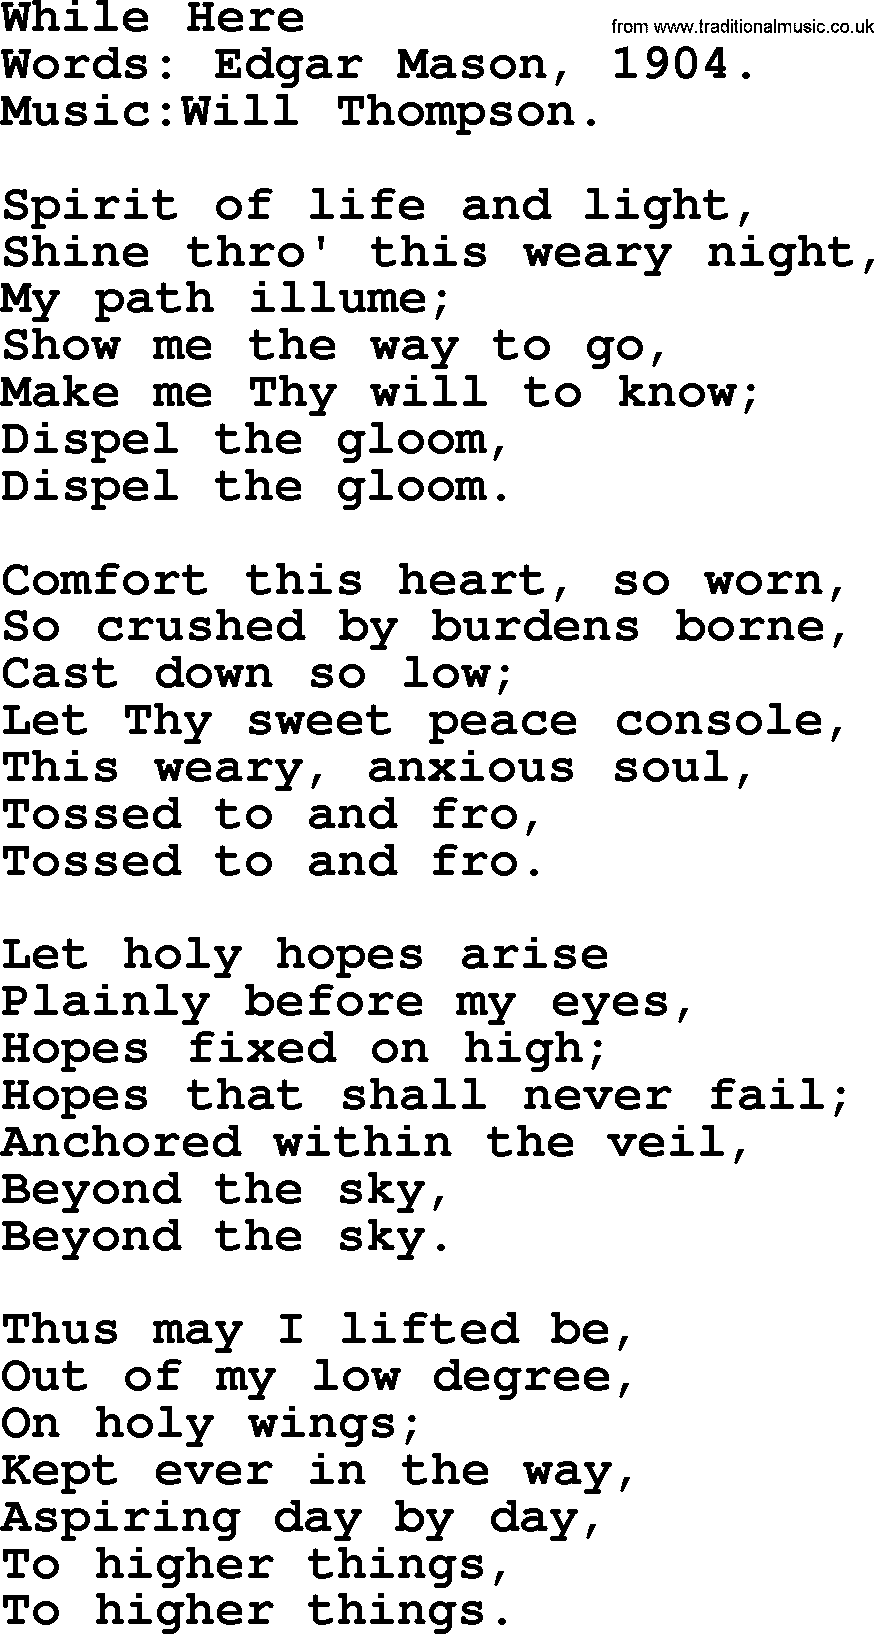 Pentacost Hymns, Hymn: While Here, lyrics with PDF